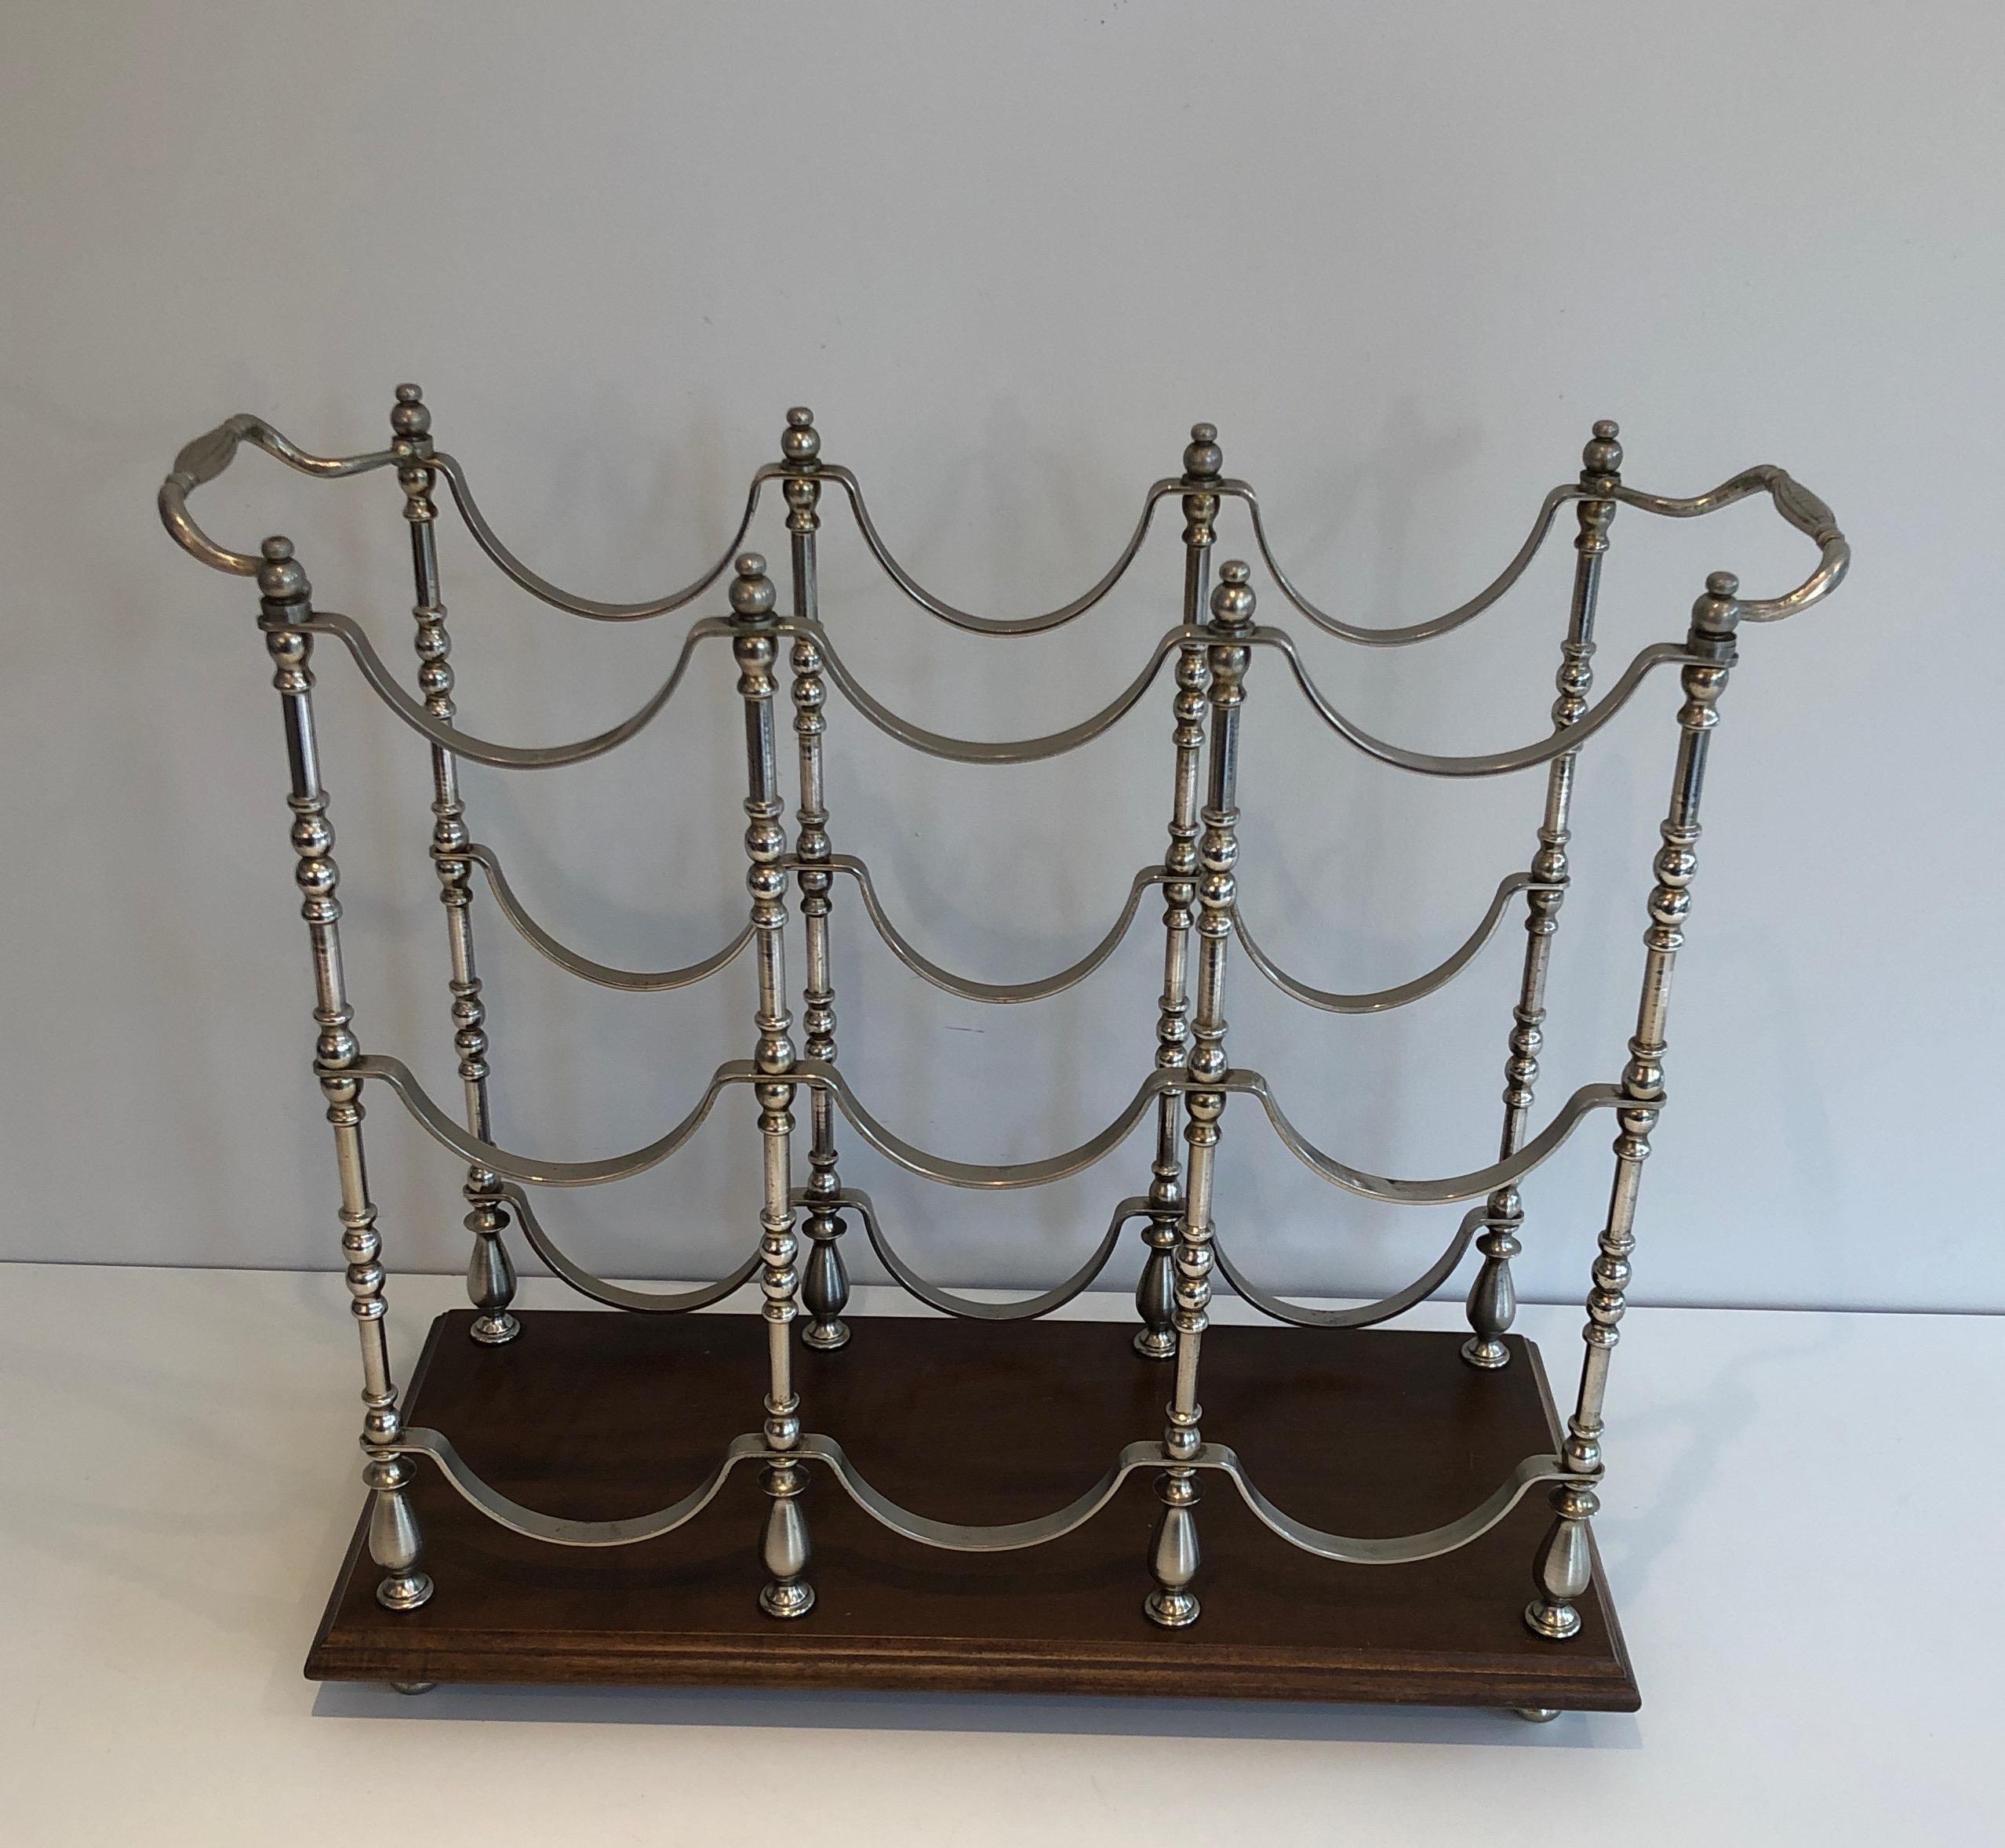 Neoclassical Silvered Metal Bottles Holder on a Wooden Base, French, Circa 1960 For Sale